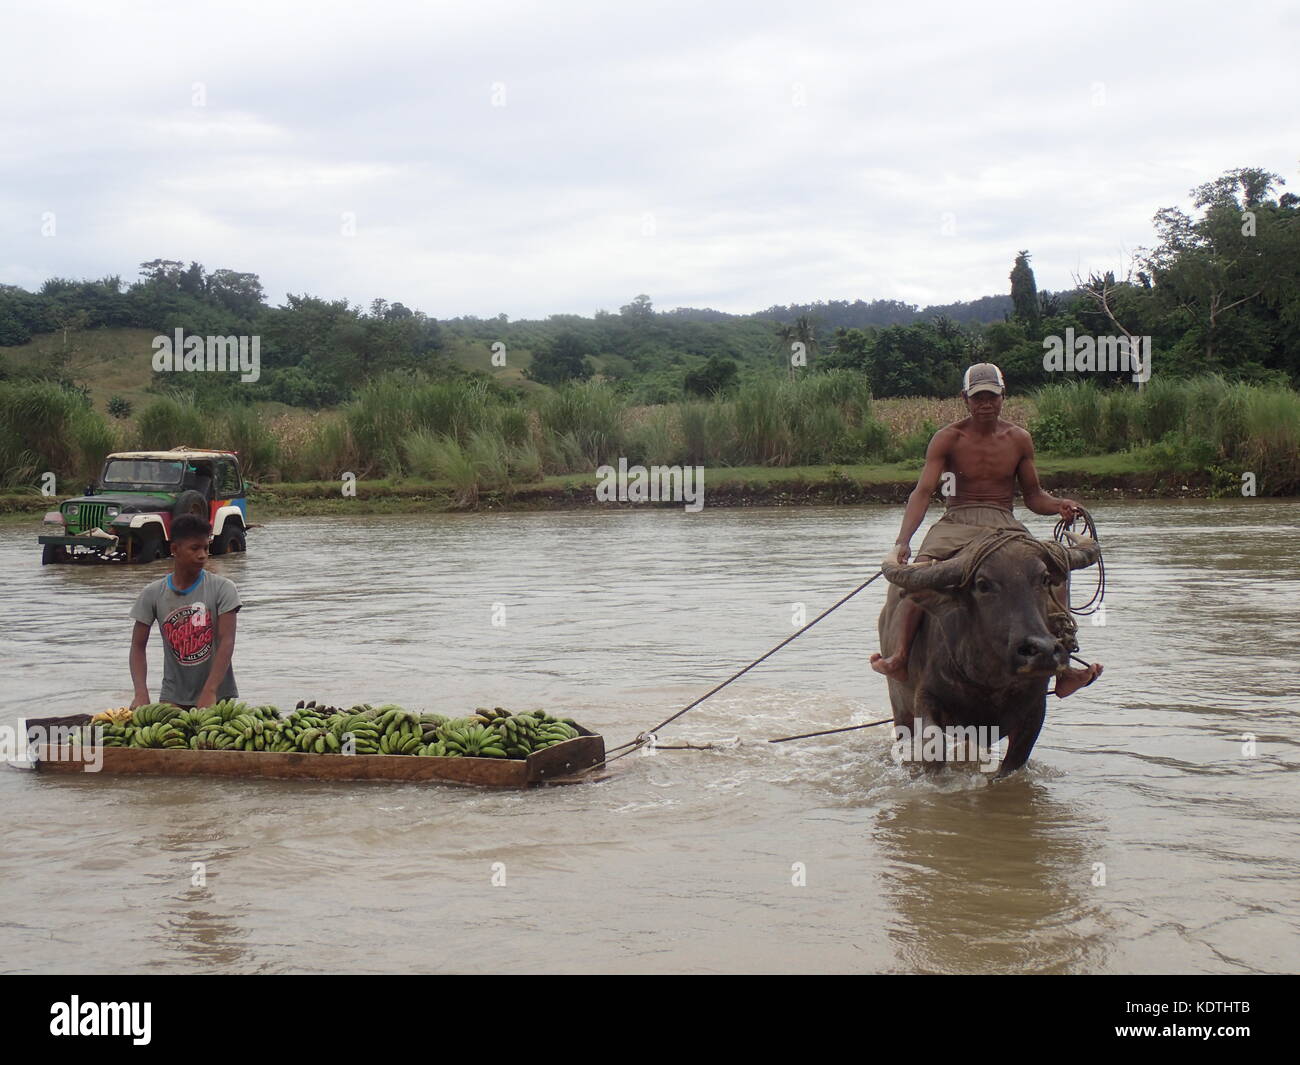 Philippines. 14th Oct, 2017. Severe tropical depression Odette made Sinundungan River in Cagayan Valley overflow. The strong water current made it not passable for people crossing the river. Farmers used their buffalo to cross the river and transport their harvest of vegetables and fruits to the market. Credit: Sherbien Dacalanio/Pacific Press/Alamy Live News Stock Photo